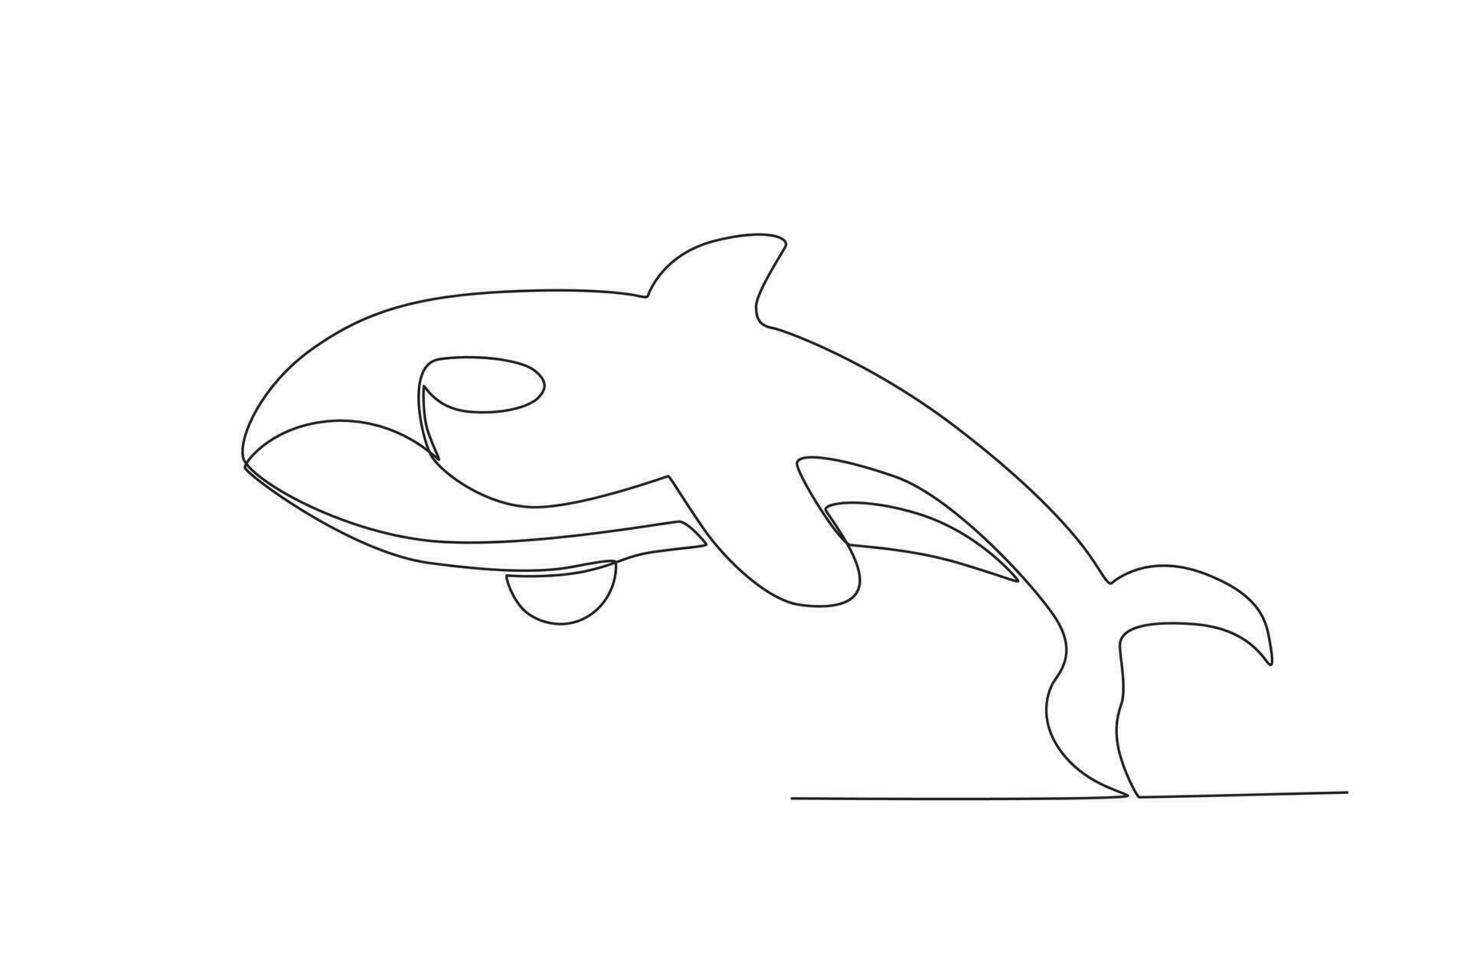 Single one line drawing of a erce whale. Continuous line draw design graphic vector illustration.